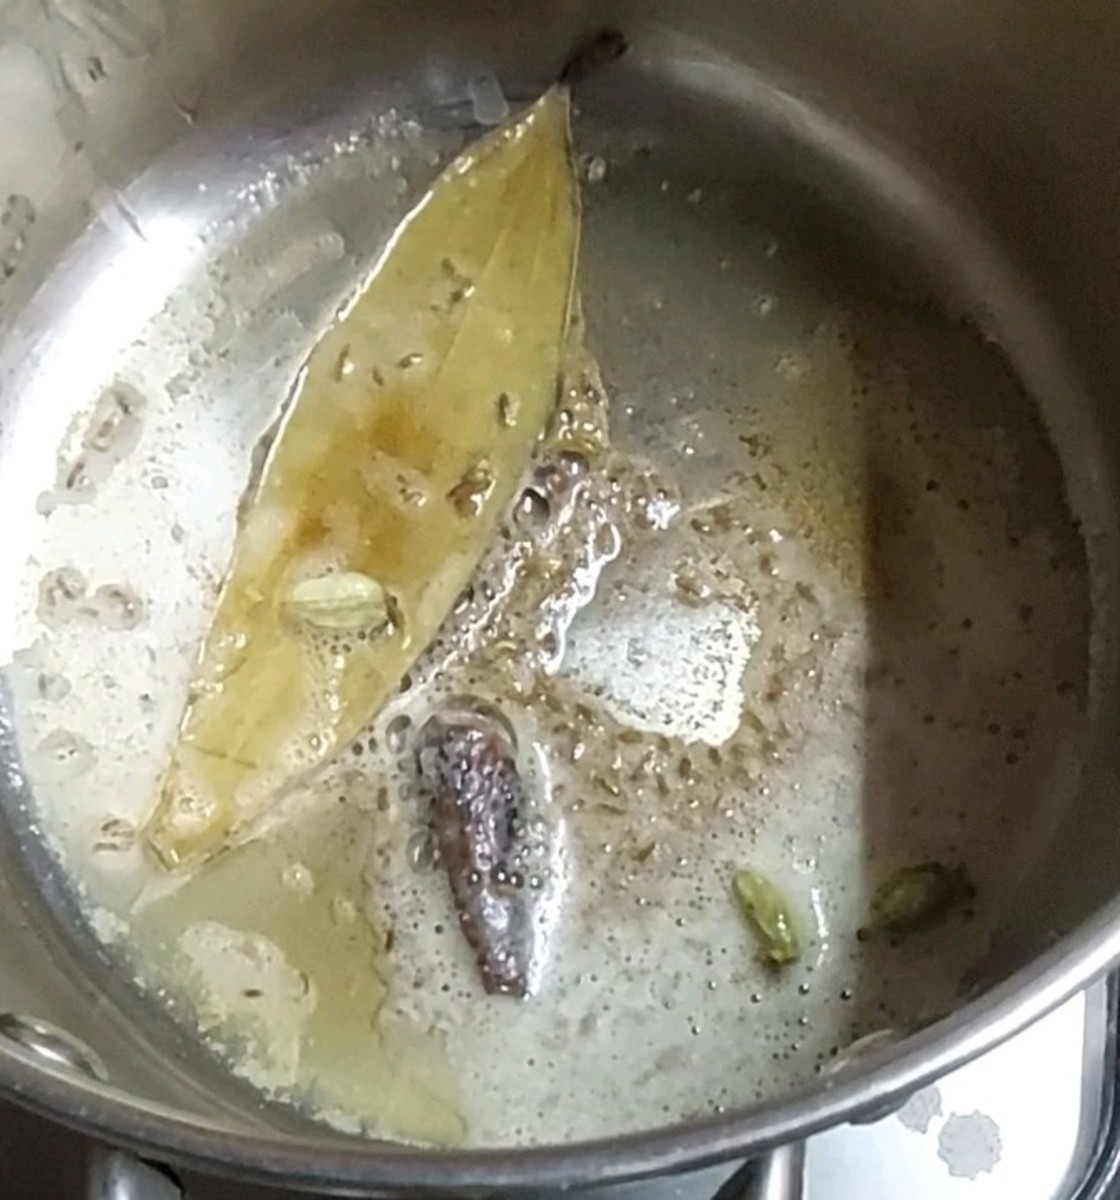 In a pan, heat 2 tablespoons butter and 1 tablespoon ghee or clarified butter. Splutter 1 teaspoon cumin seeds. Add 1–2 bay leaves, 1-inch-long cinnamon stick, 1–2 cloves and 1–2 cardamom pods. Fry for 1 minute.